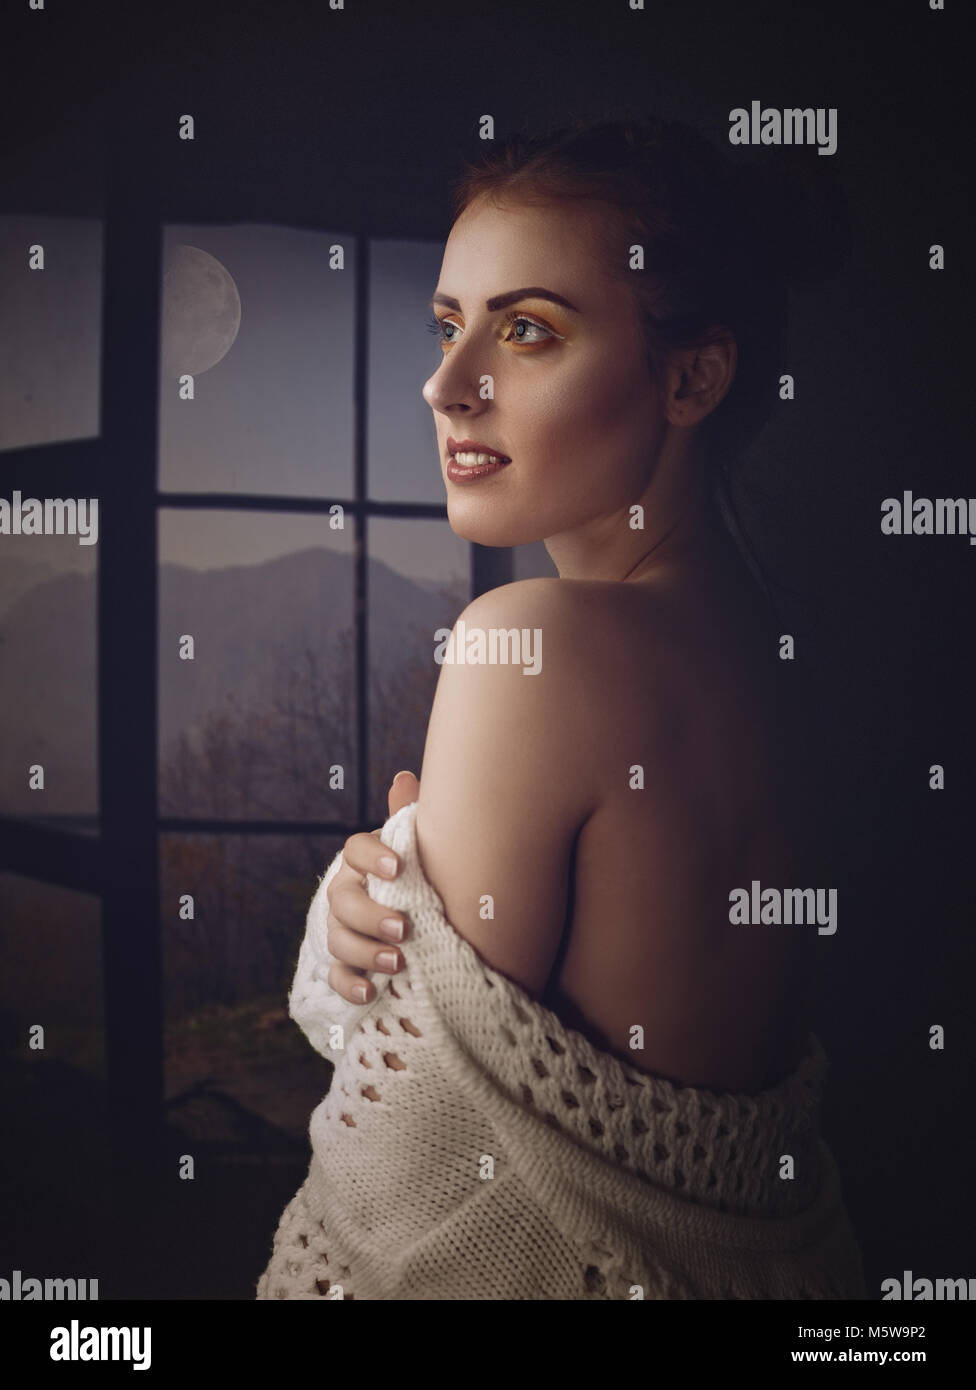 Quiet night. Art female portrait with red head beauty woman, open window and full moon Stock Photo